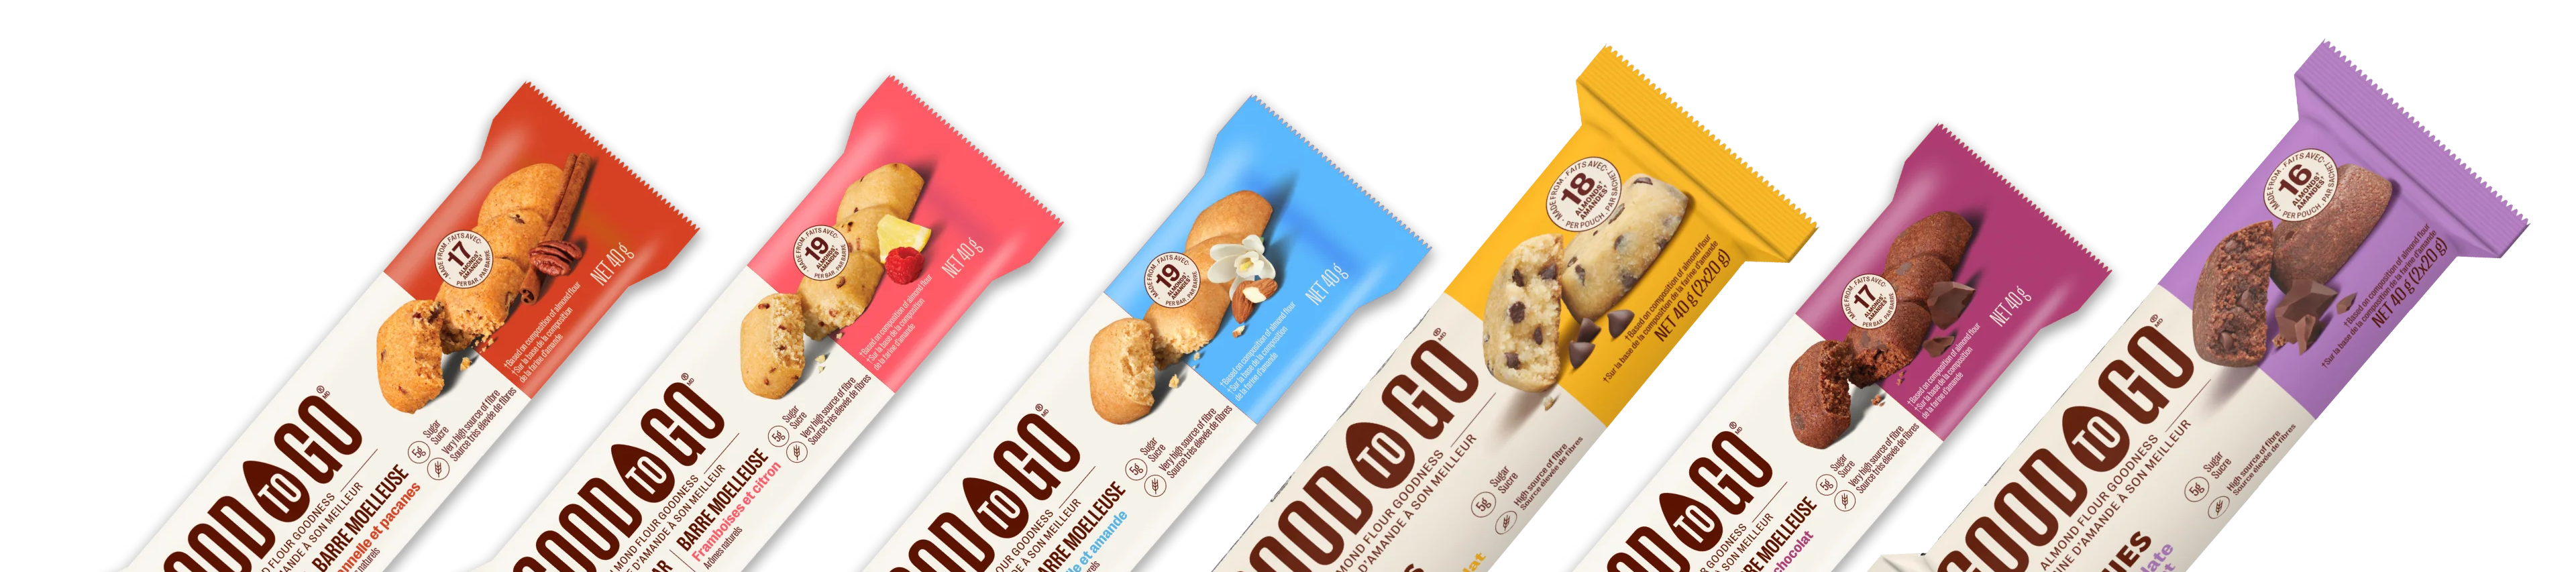 Individually wrapped snacks from GOOD TO GO, including GOOD TO GO Brownies, Blondies and Soft Baked Bars.